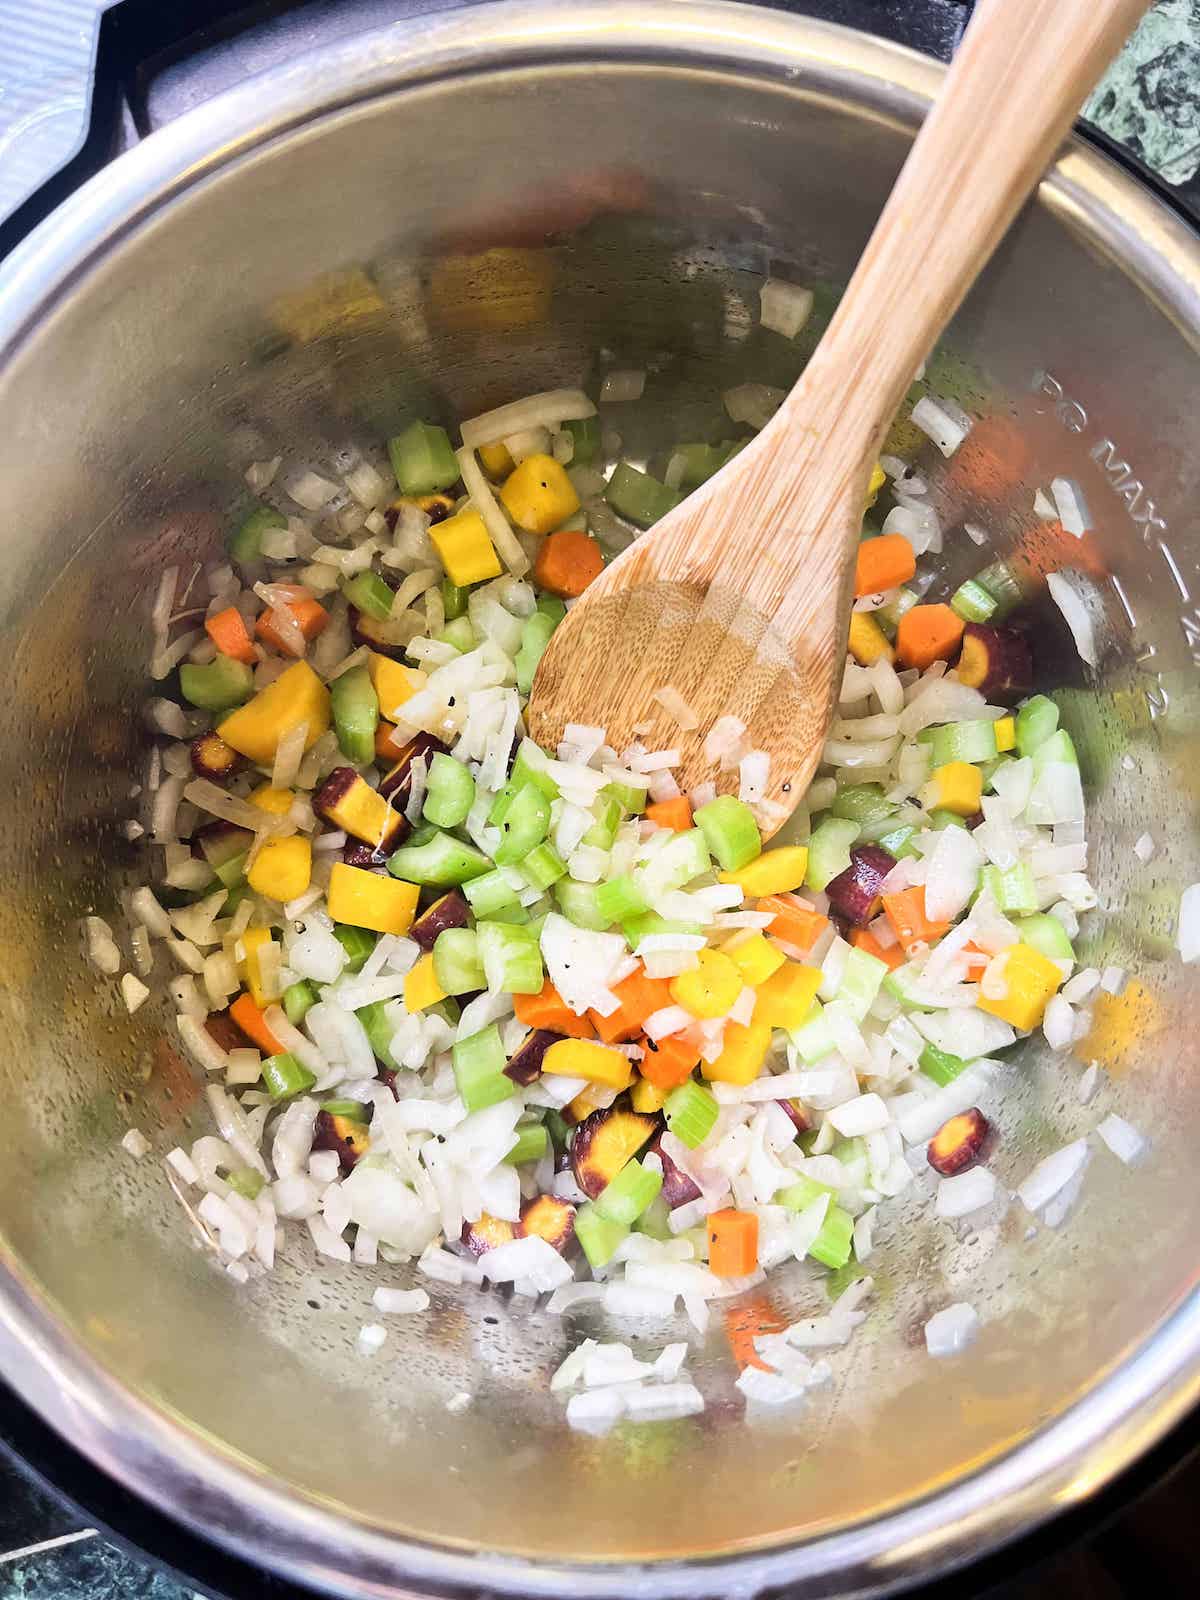 Diced onions, carrots and celery cooking in an Instant Pot with a wooden spoon.